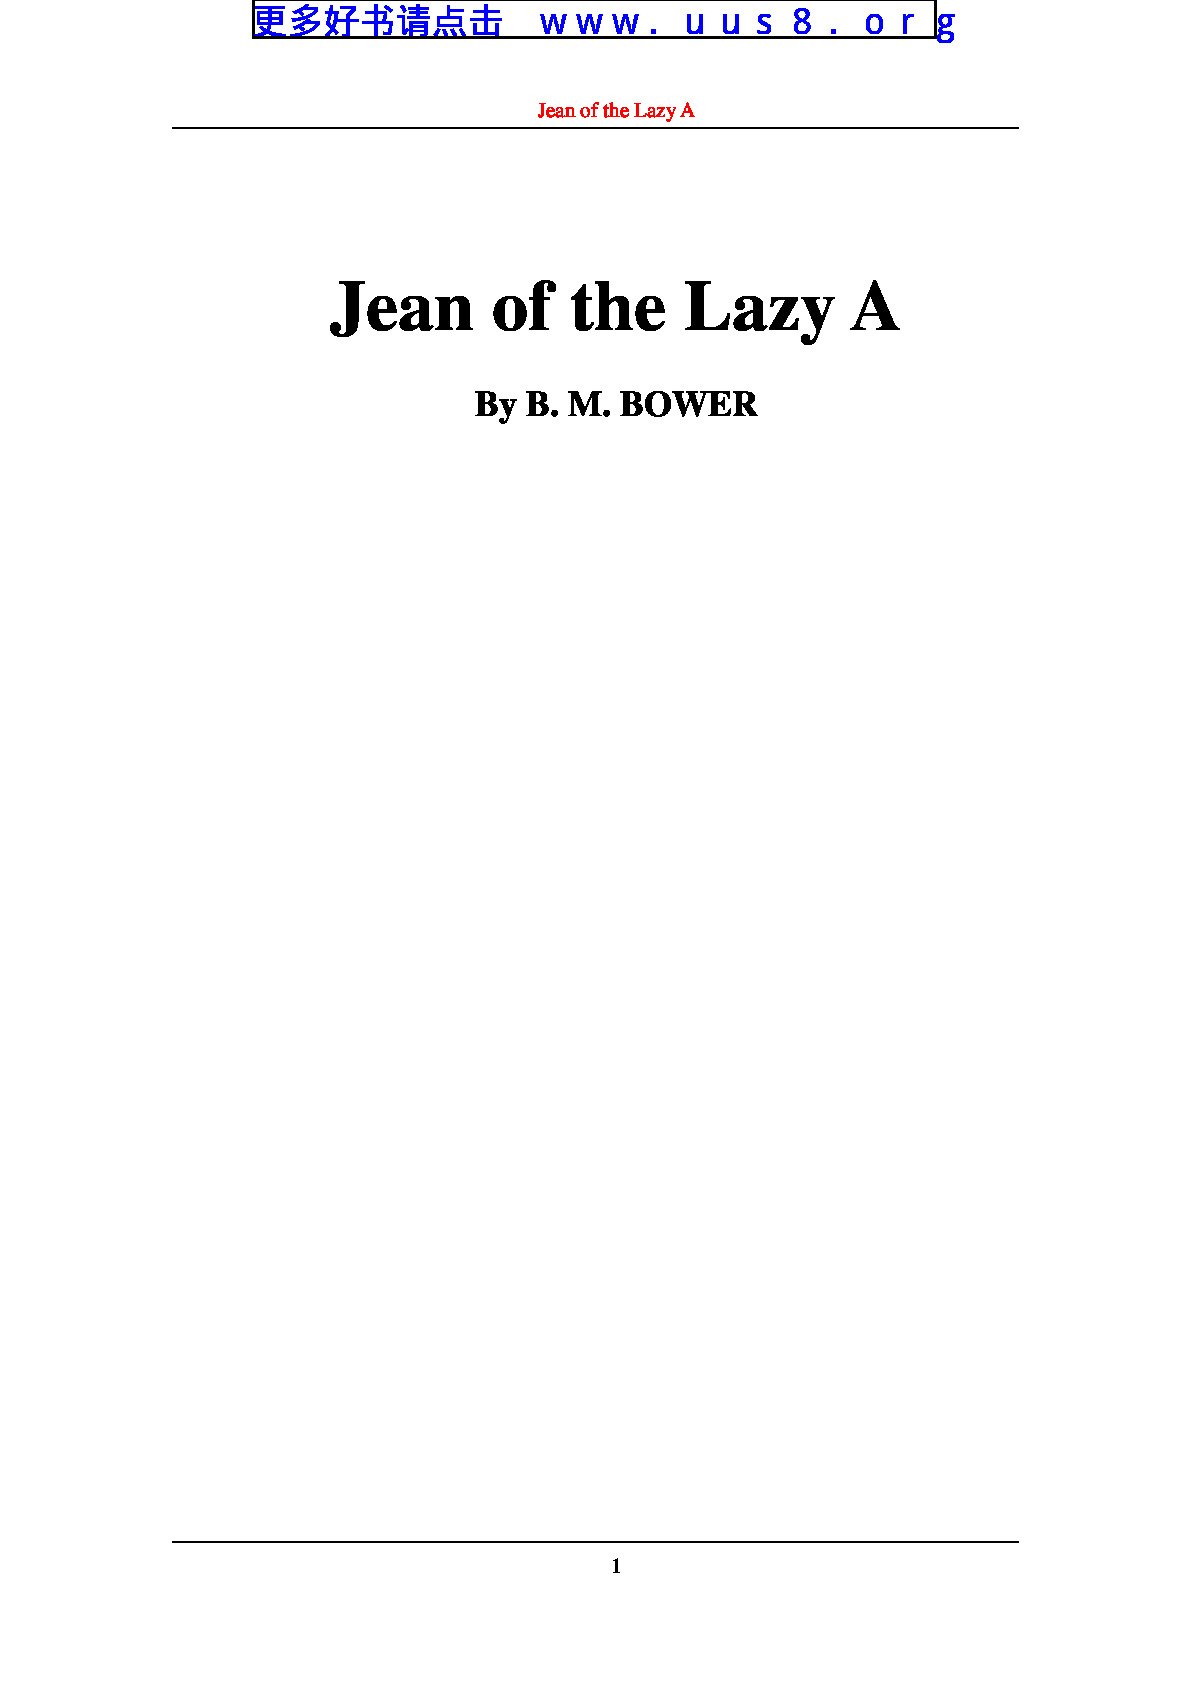 Jean_of_the_Lazy_A(吉恩)